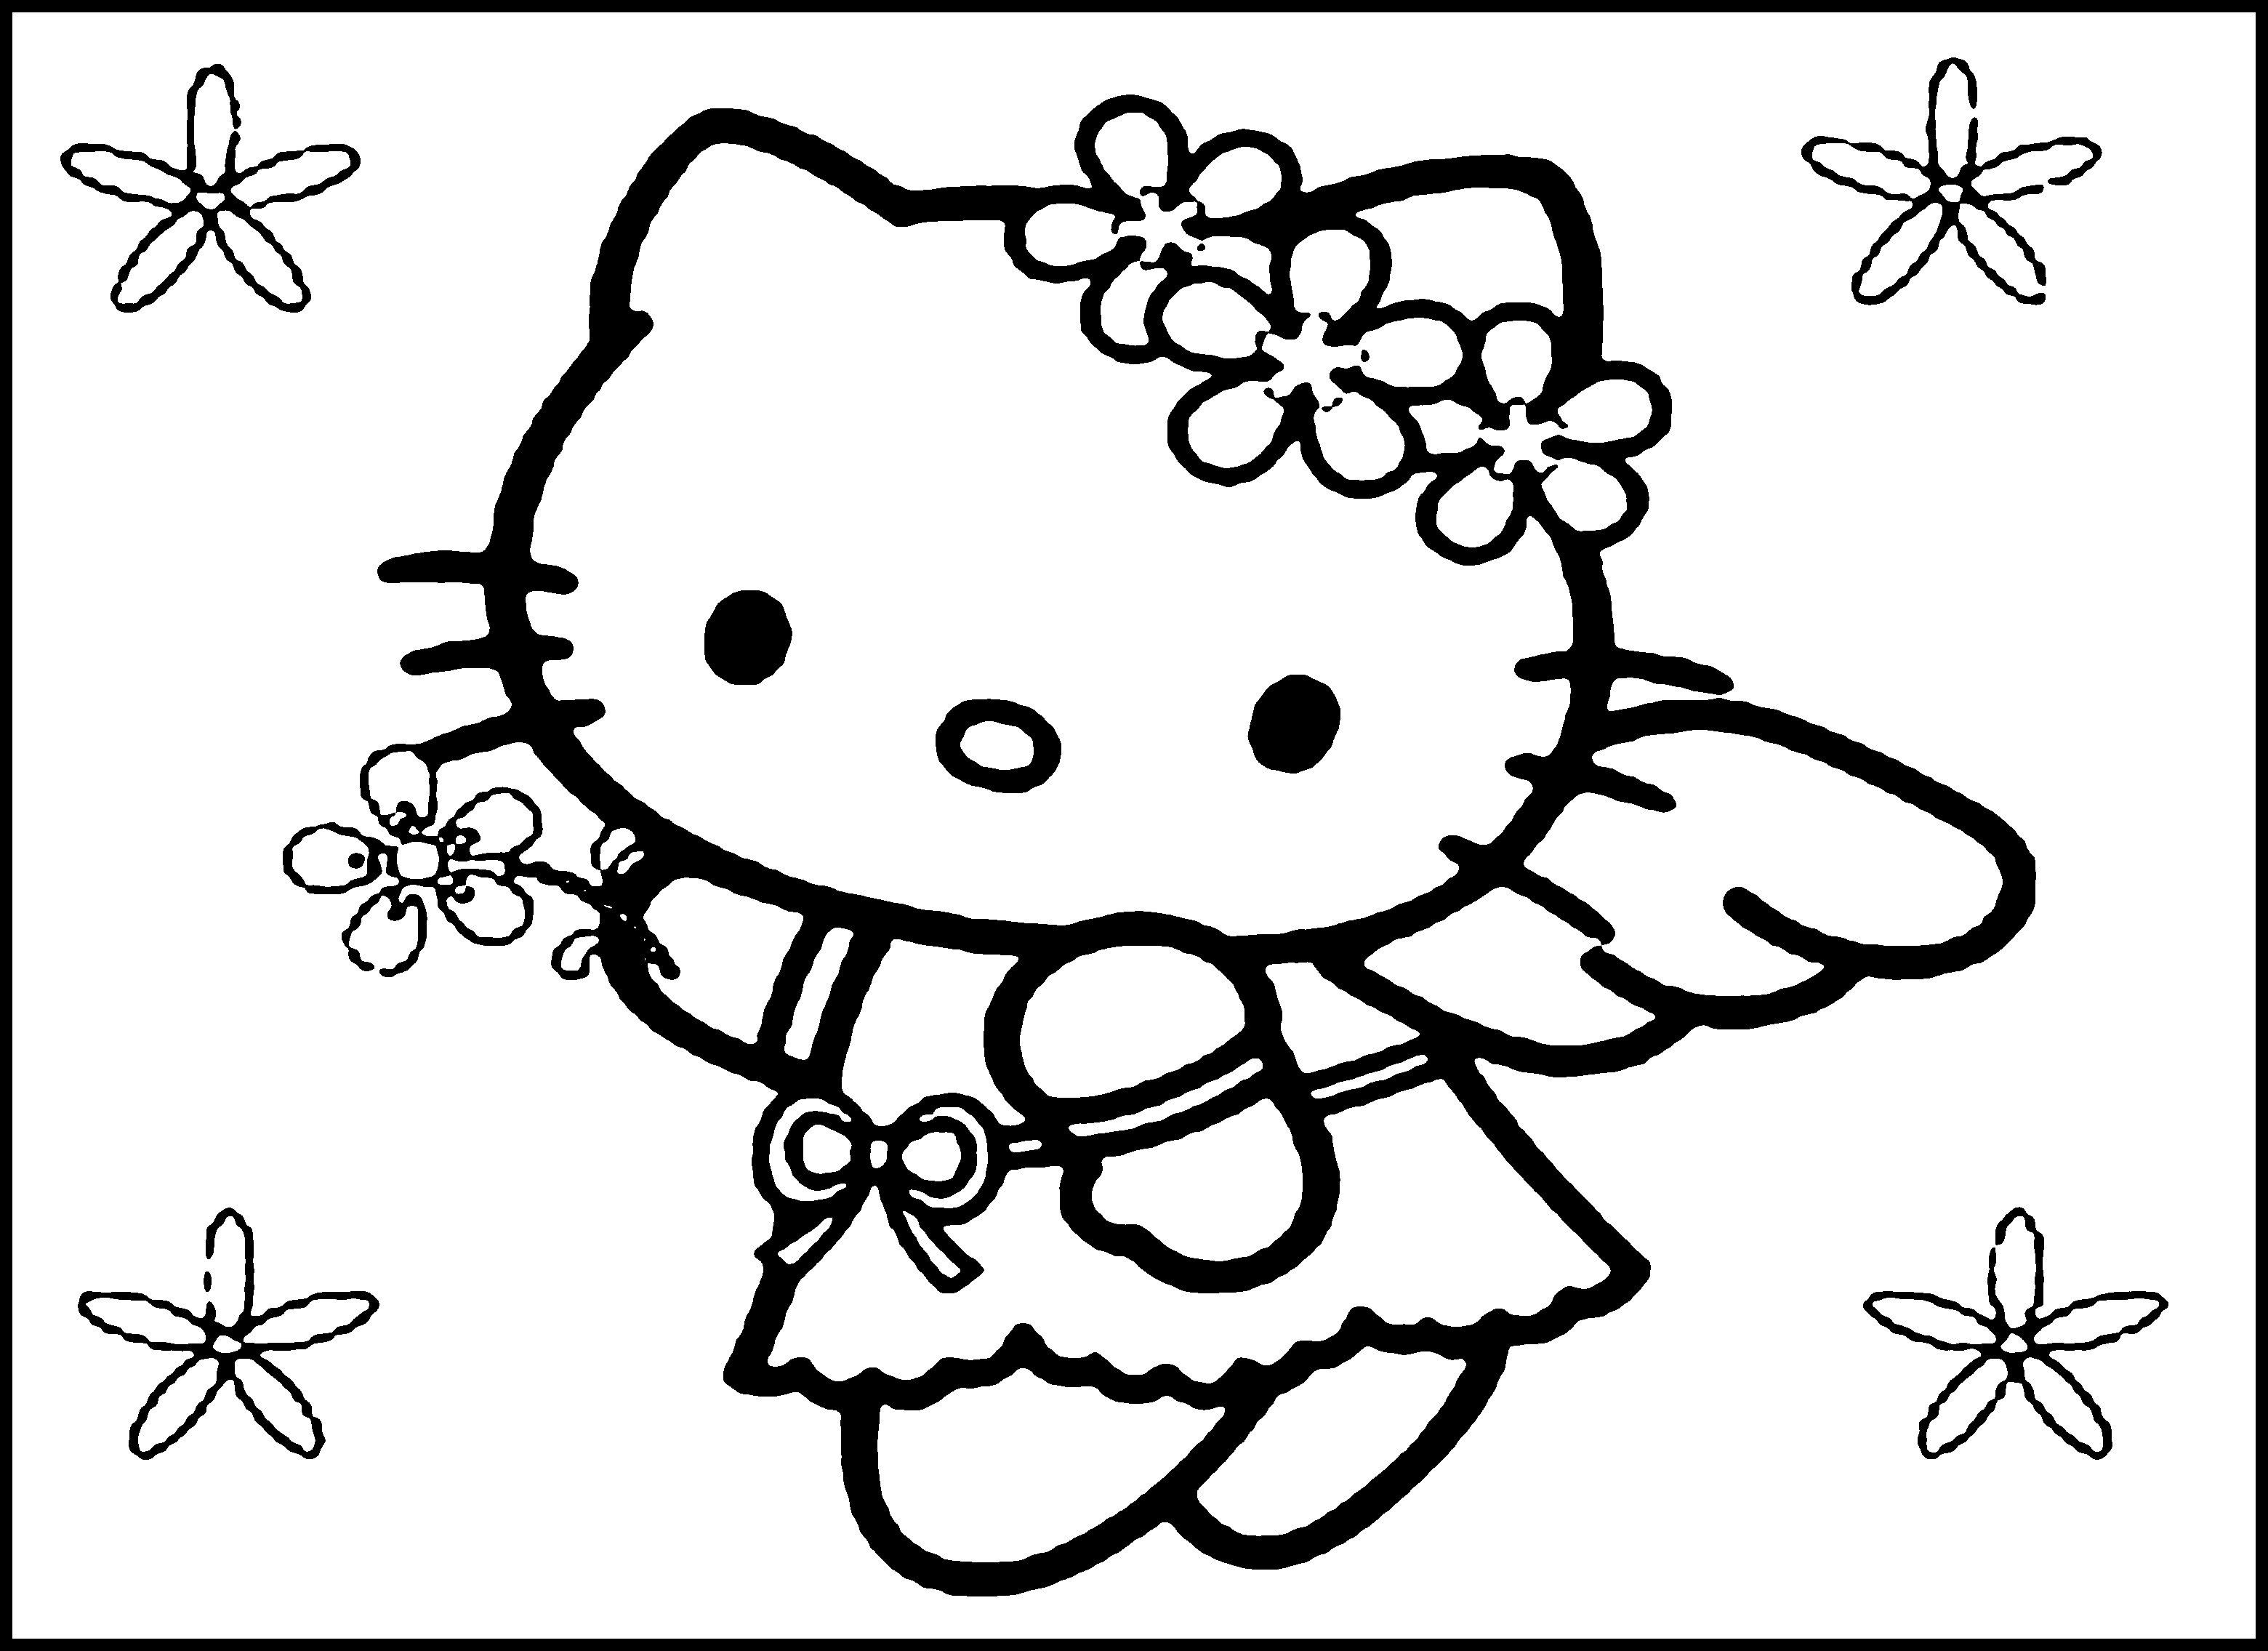 Hello Kitty coloring pages on